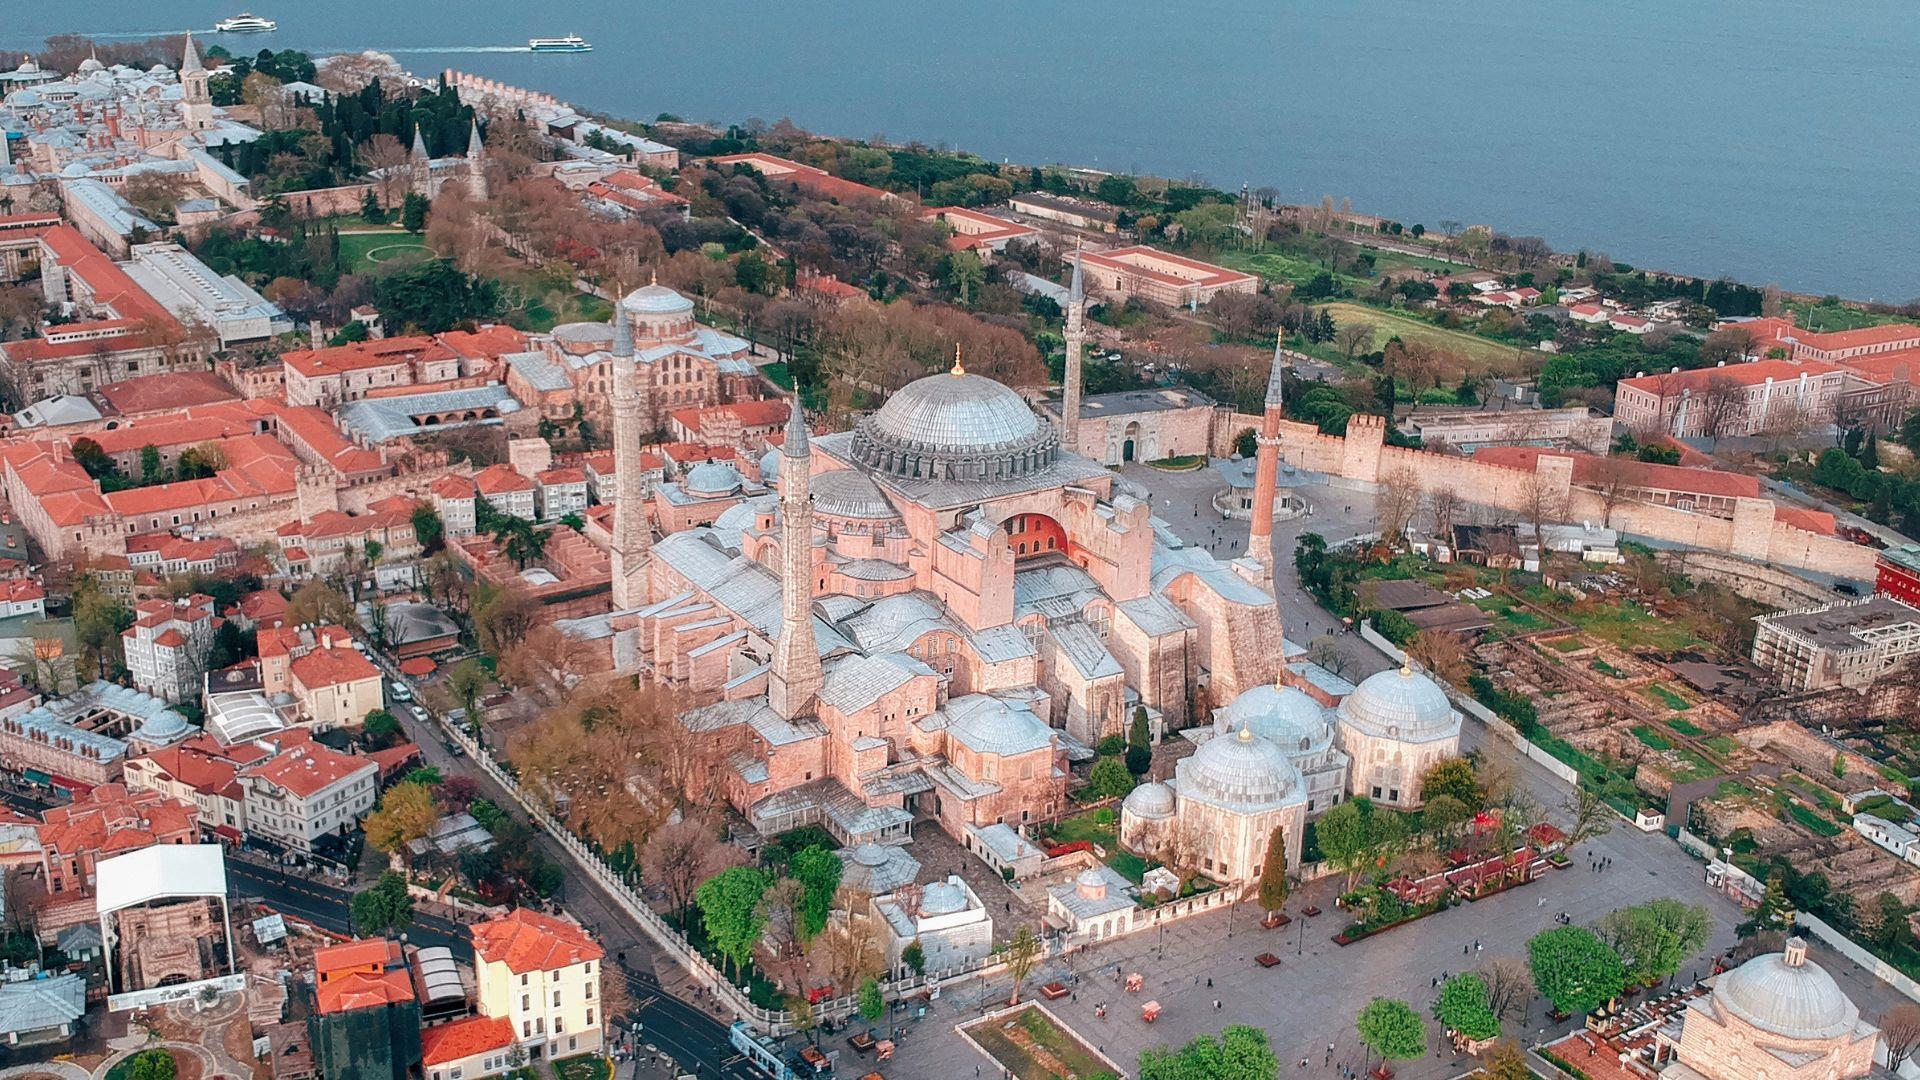 Hagia Sophia Guided Tour with Entry Ticket